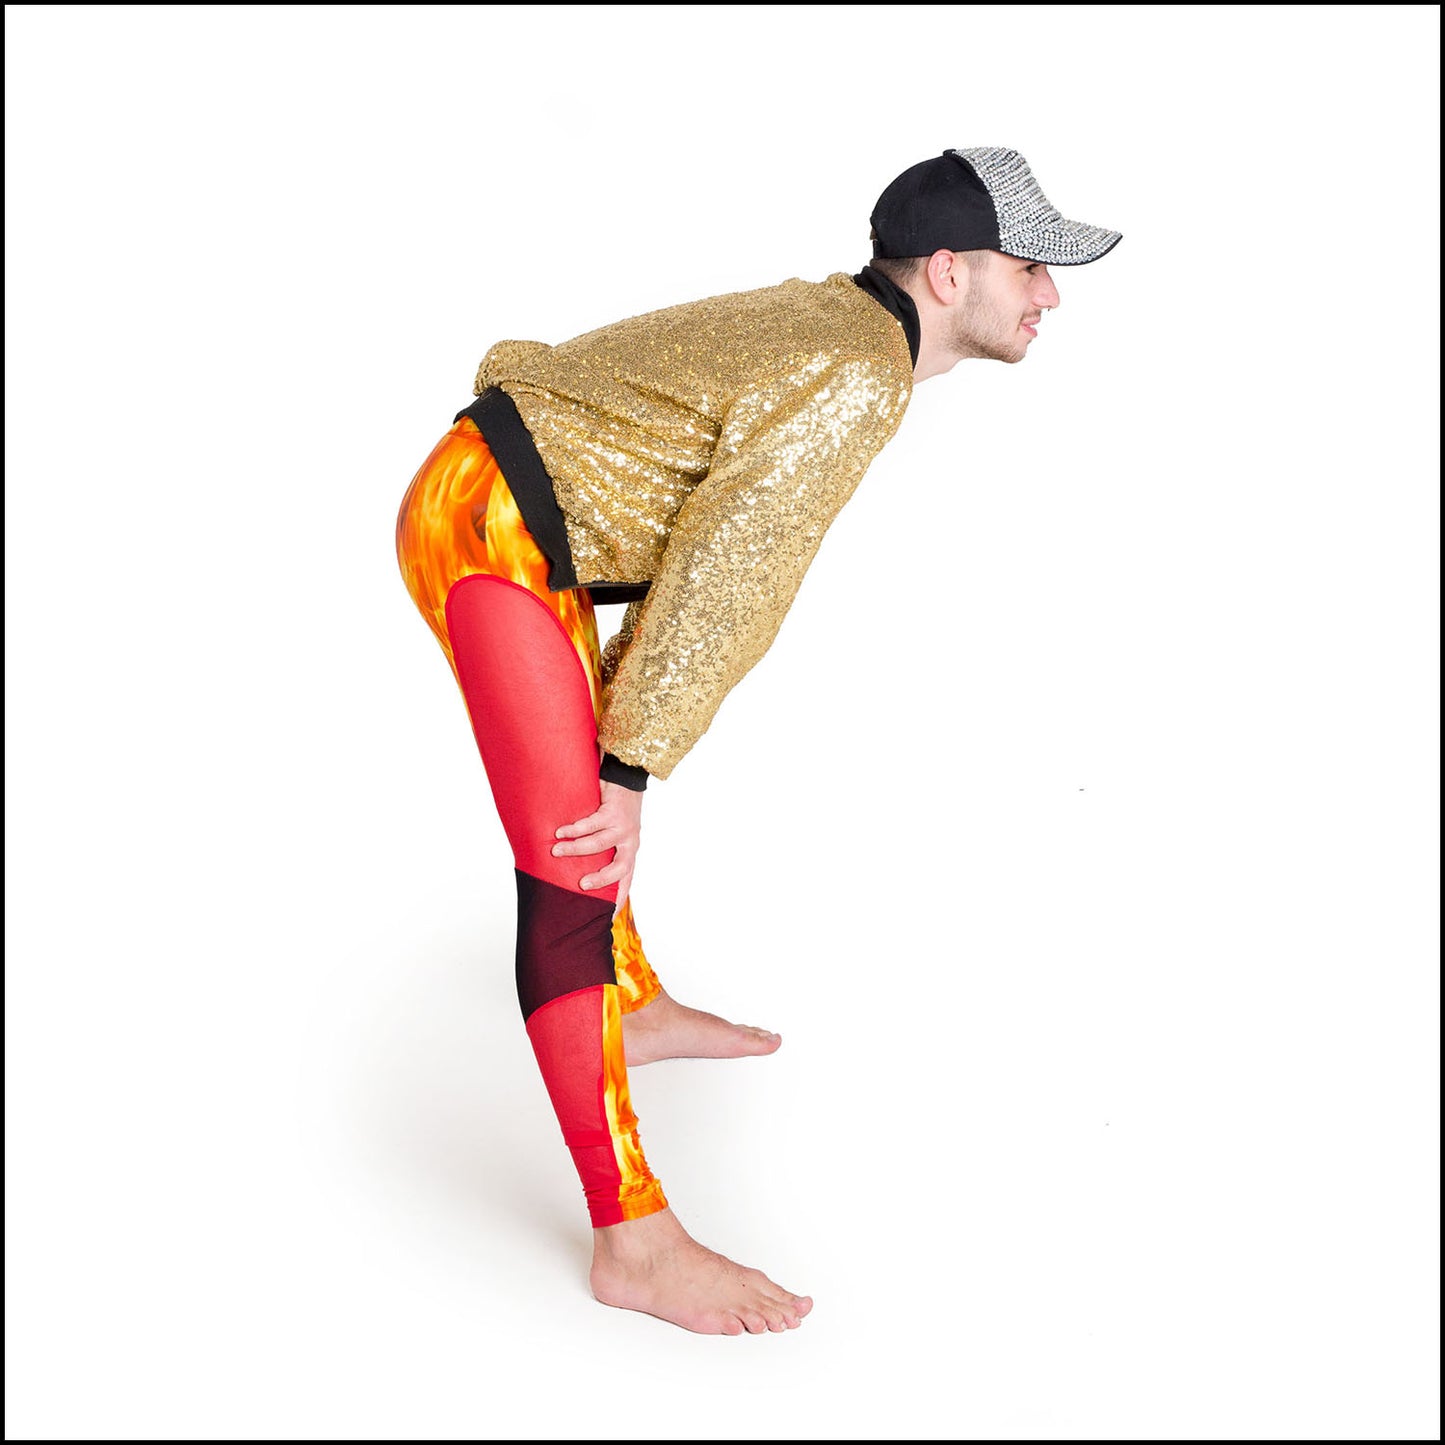 Blaze Leggings, a handmade-to-order piece in orange flame printed spandex. These scorching leggings are both stylish and sustainable. The unisex design features a high elasticated waistband and black over red mesh knee and red mesh side panels.